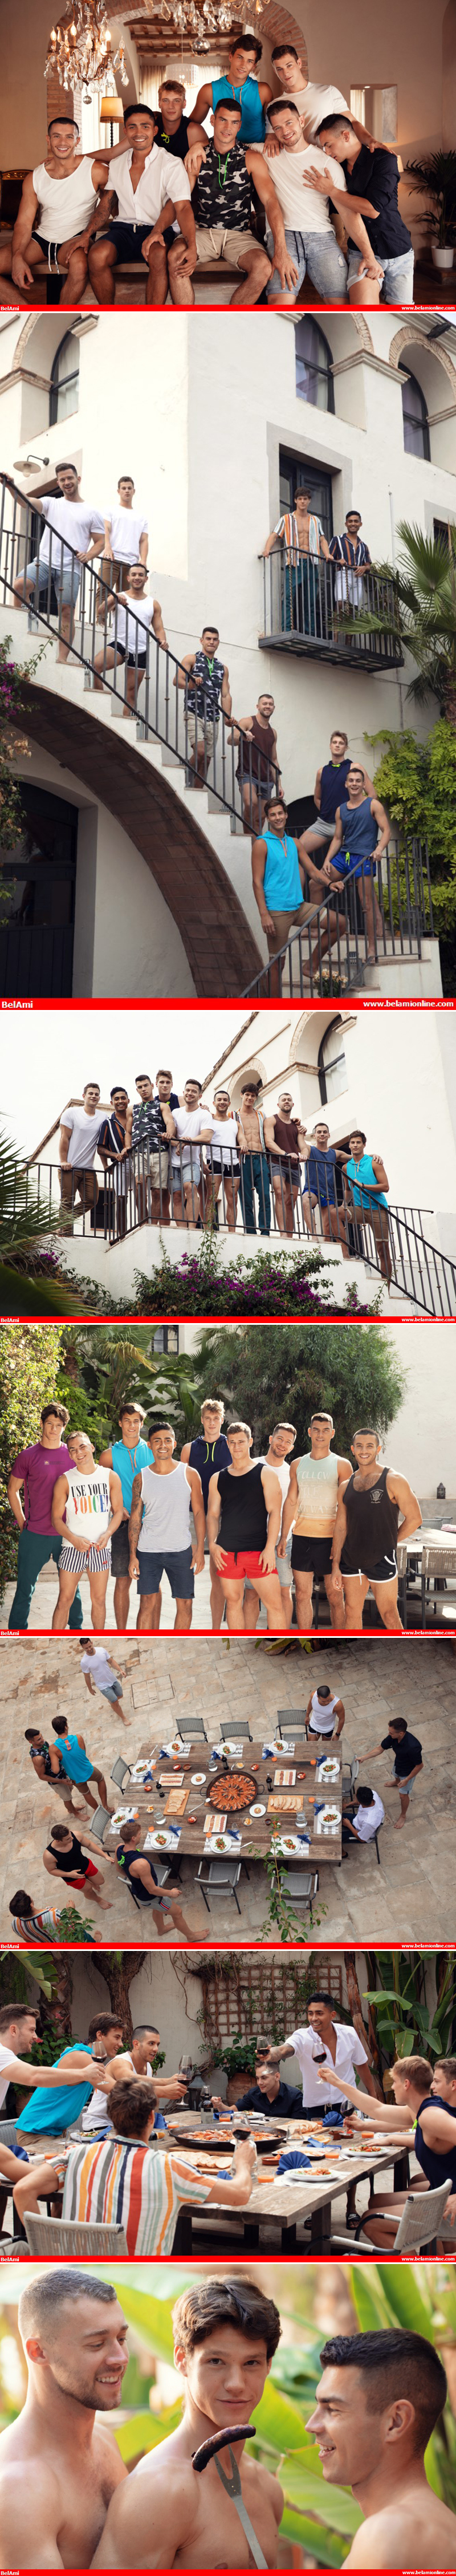 Photos From BelAmi and SeanCody's Upcoming Collaboration at BelAmiOnline